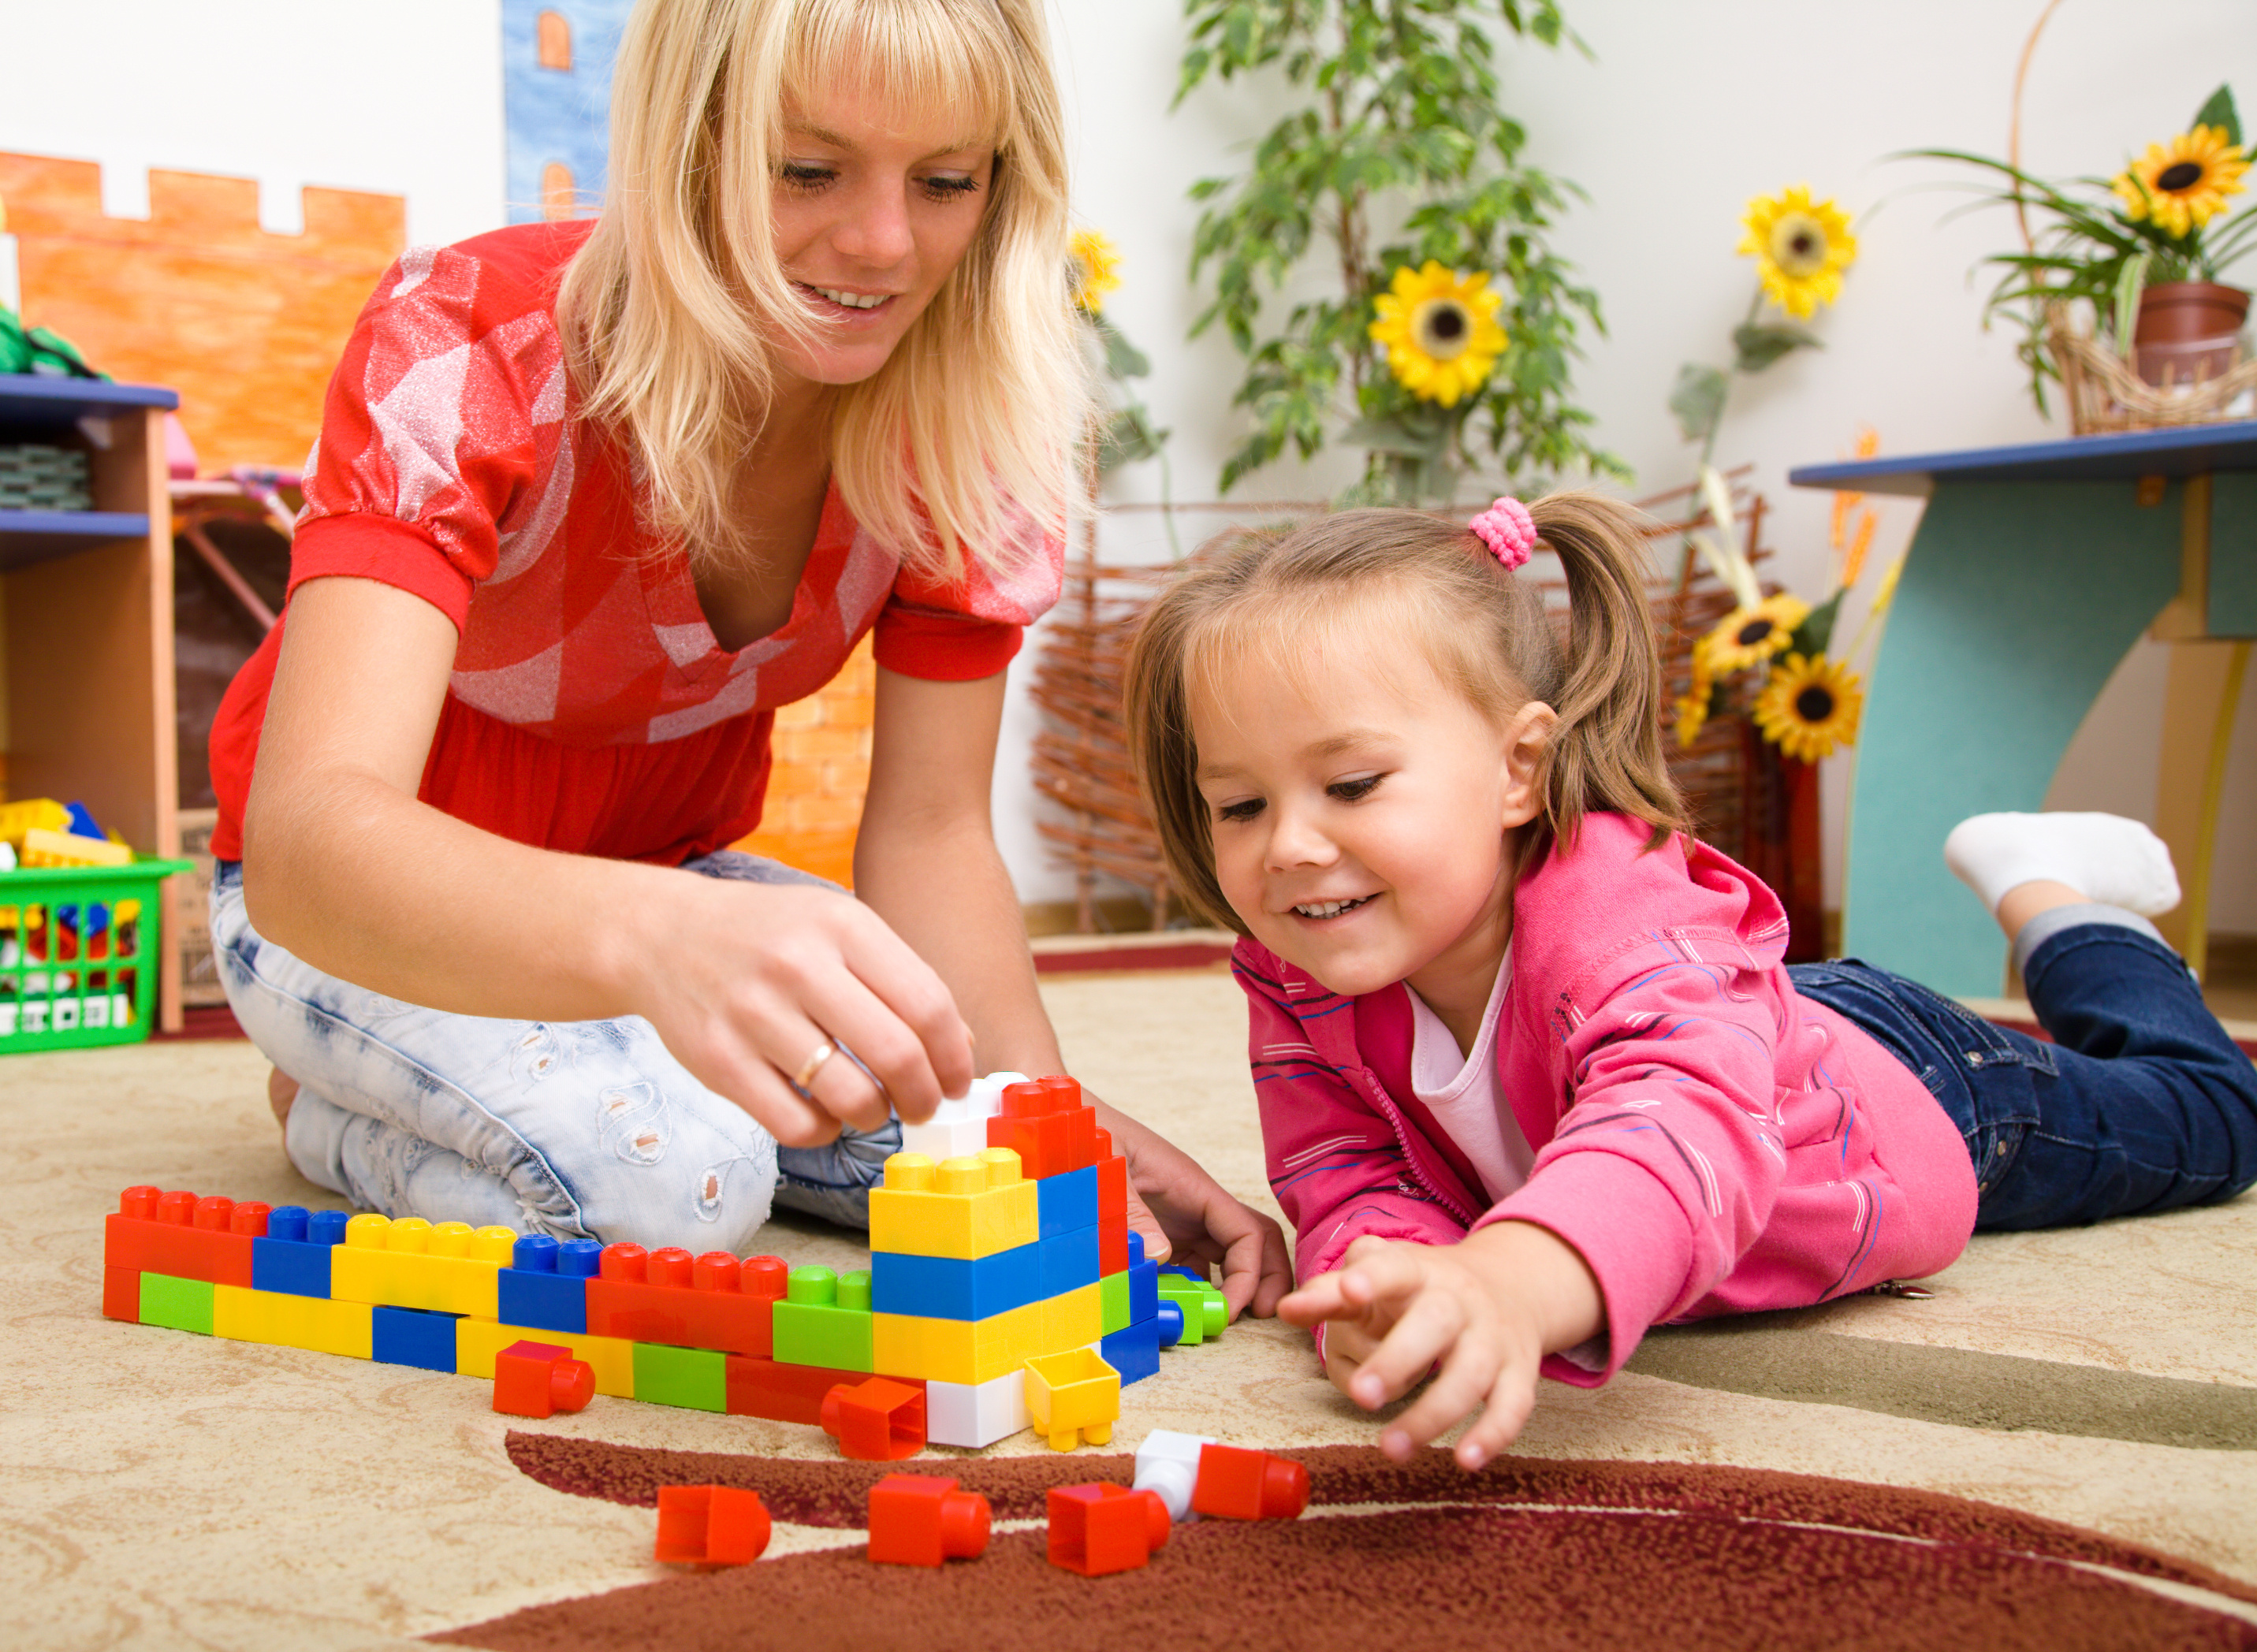 Teacher and child are playing with building bricks in preschool